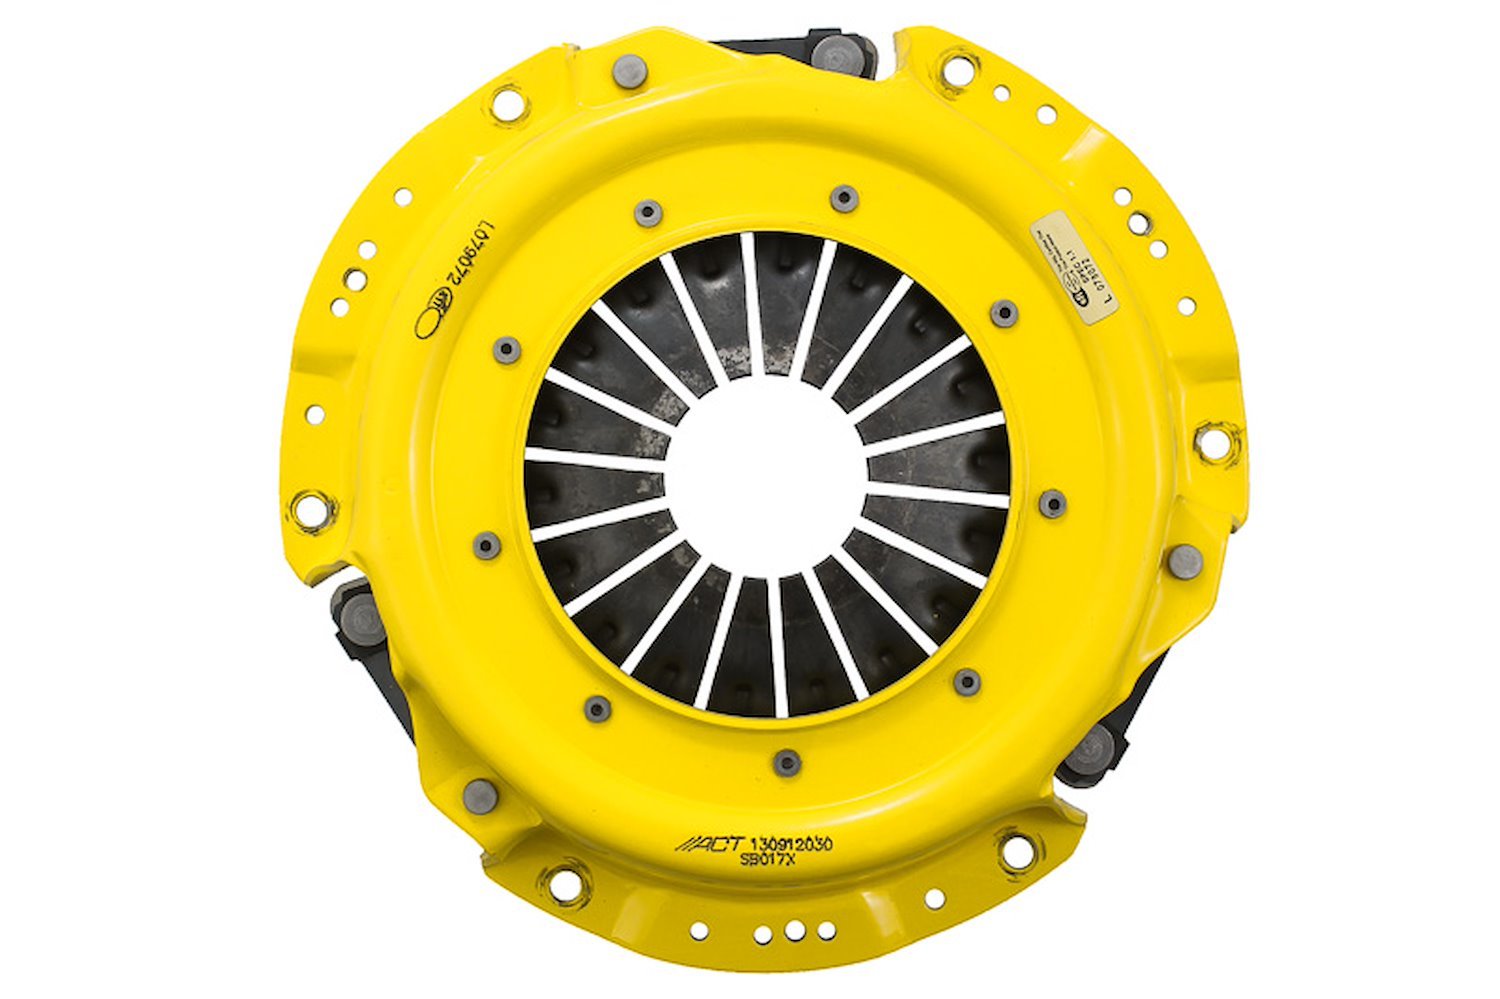 Xtreme Transmission Clutch Pressure Plate Fits Select Multiple